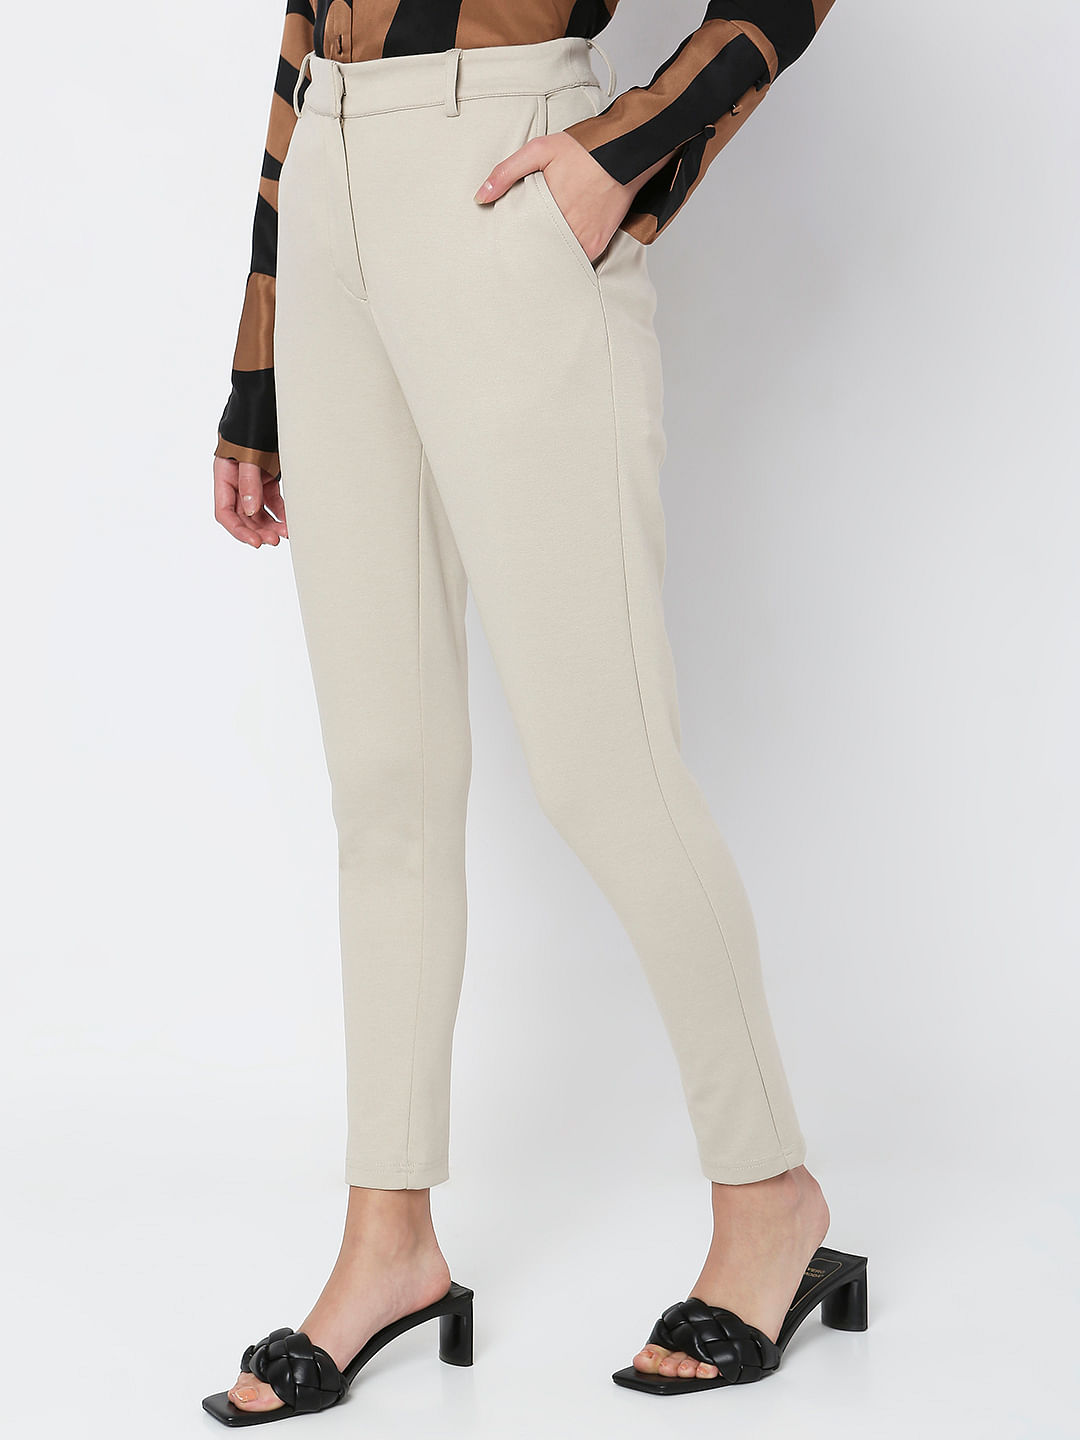 ASOS DESIGN high waisted stretch skinny pants with split front in stone |  ASOS